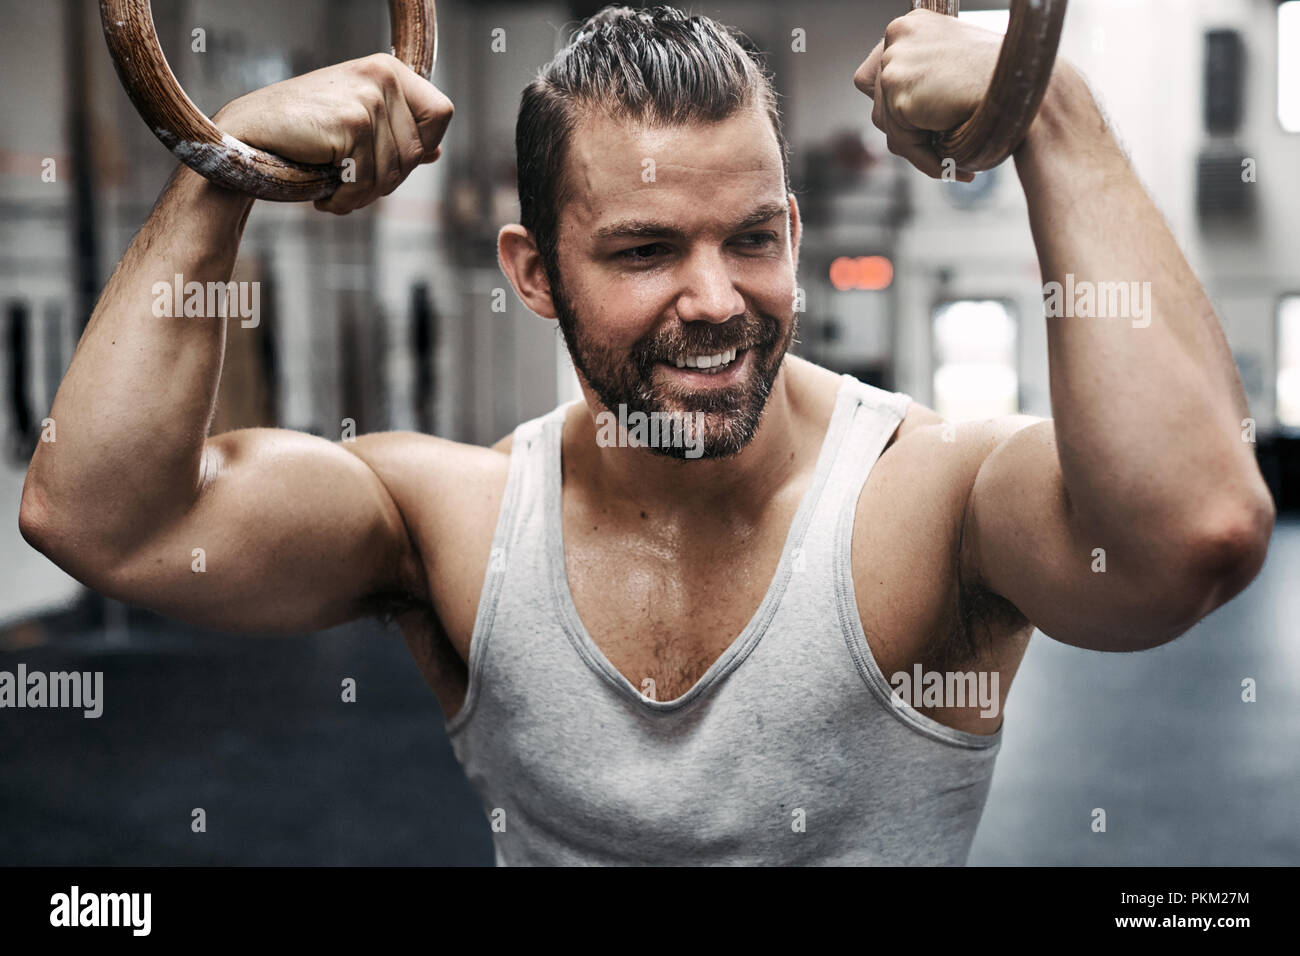 Fit young man in sportswear smiling while working up a sweat during a workout session on rings at a health club Stock Photo